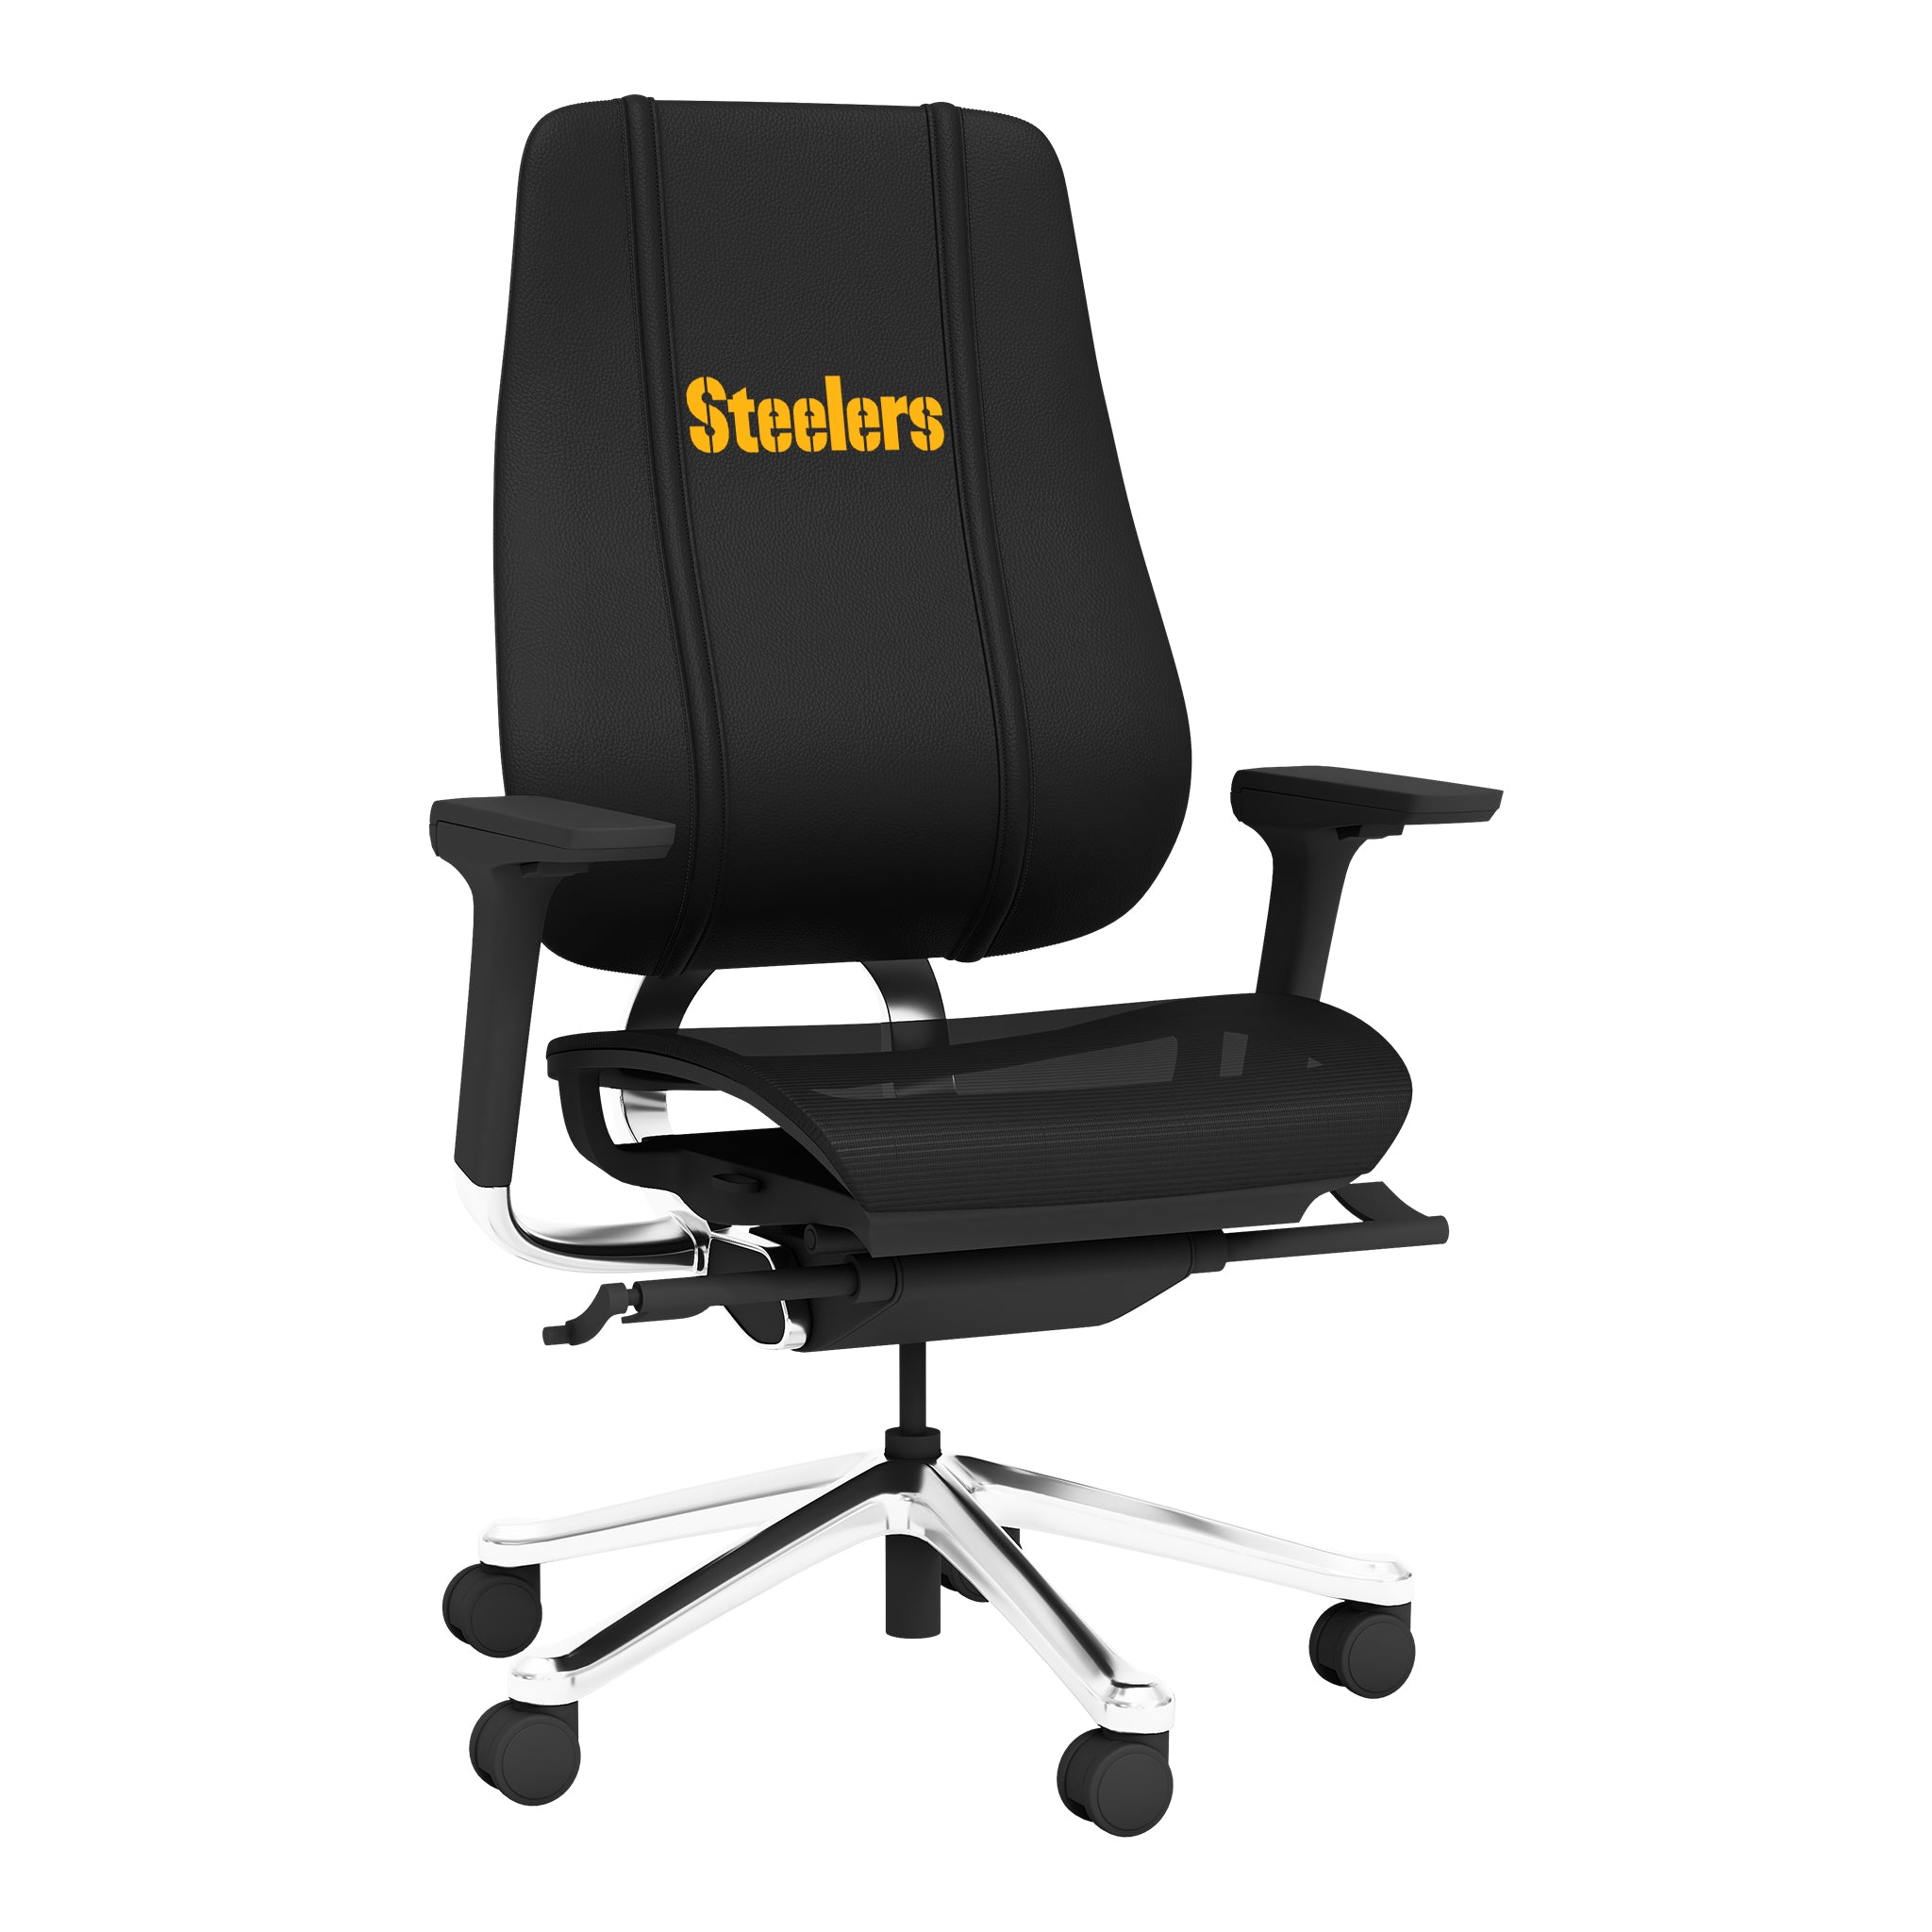 DreamSeat PhantomX Mesh Chair with Pittsburgh Steelers Secondary Logo in Black